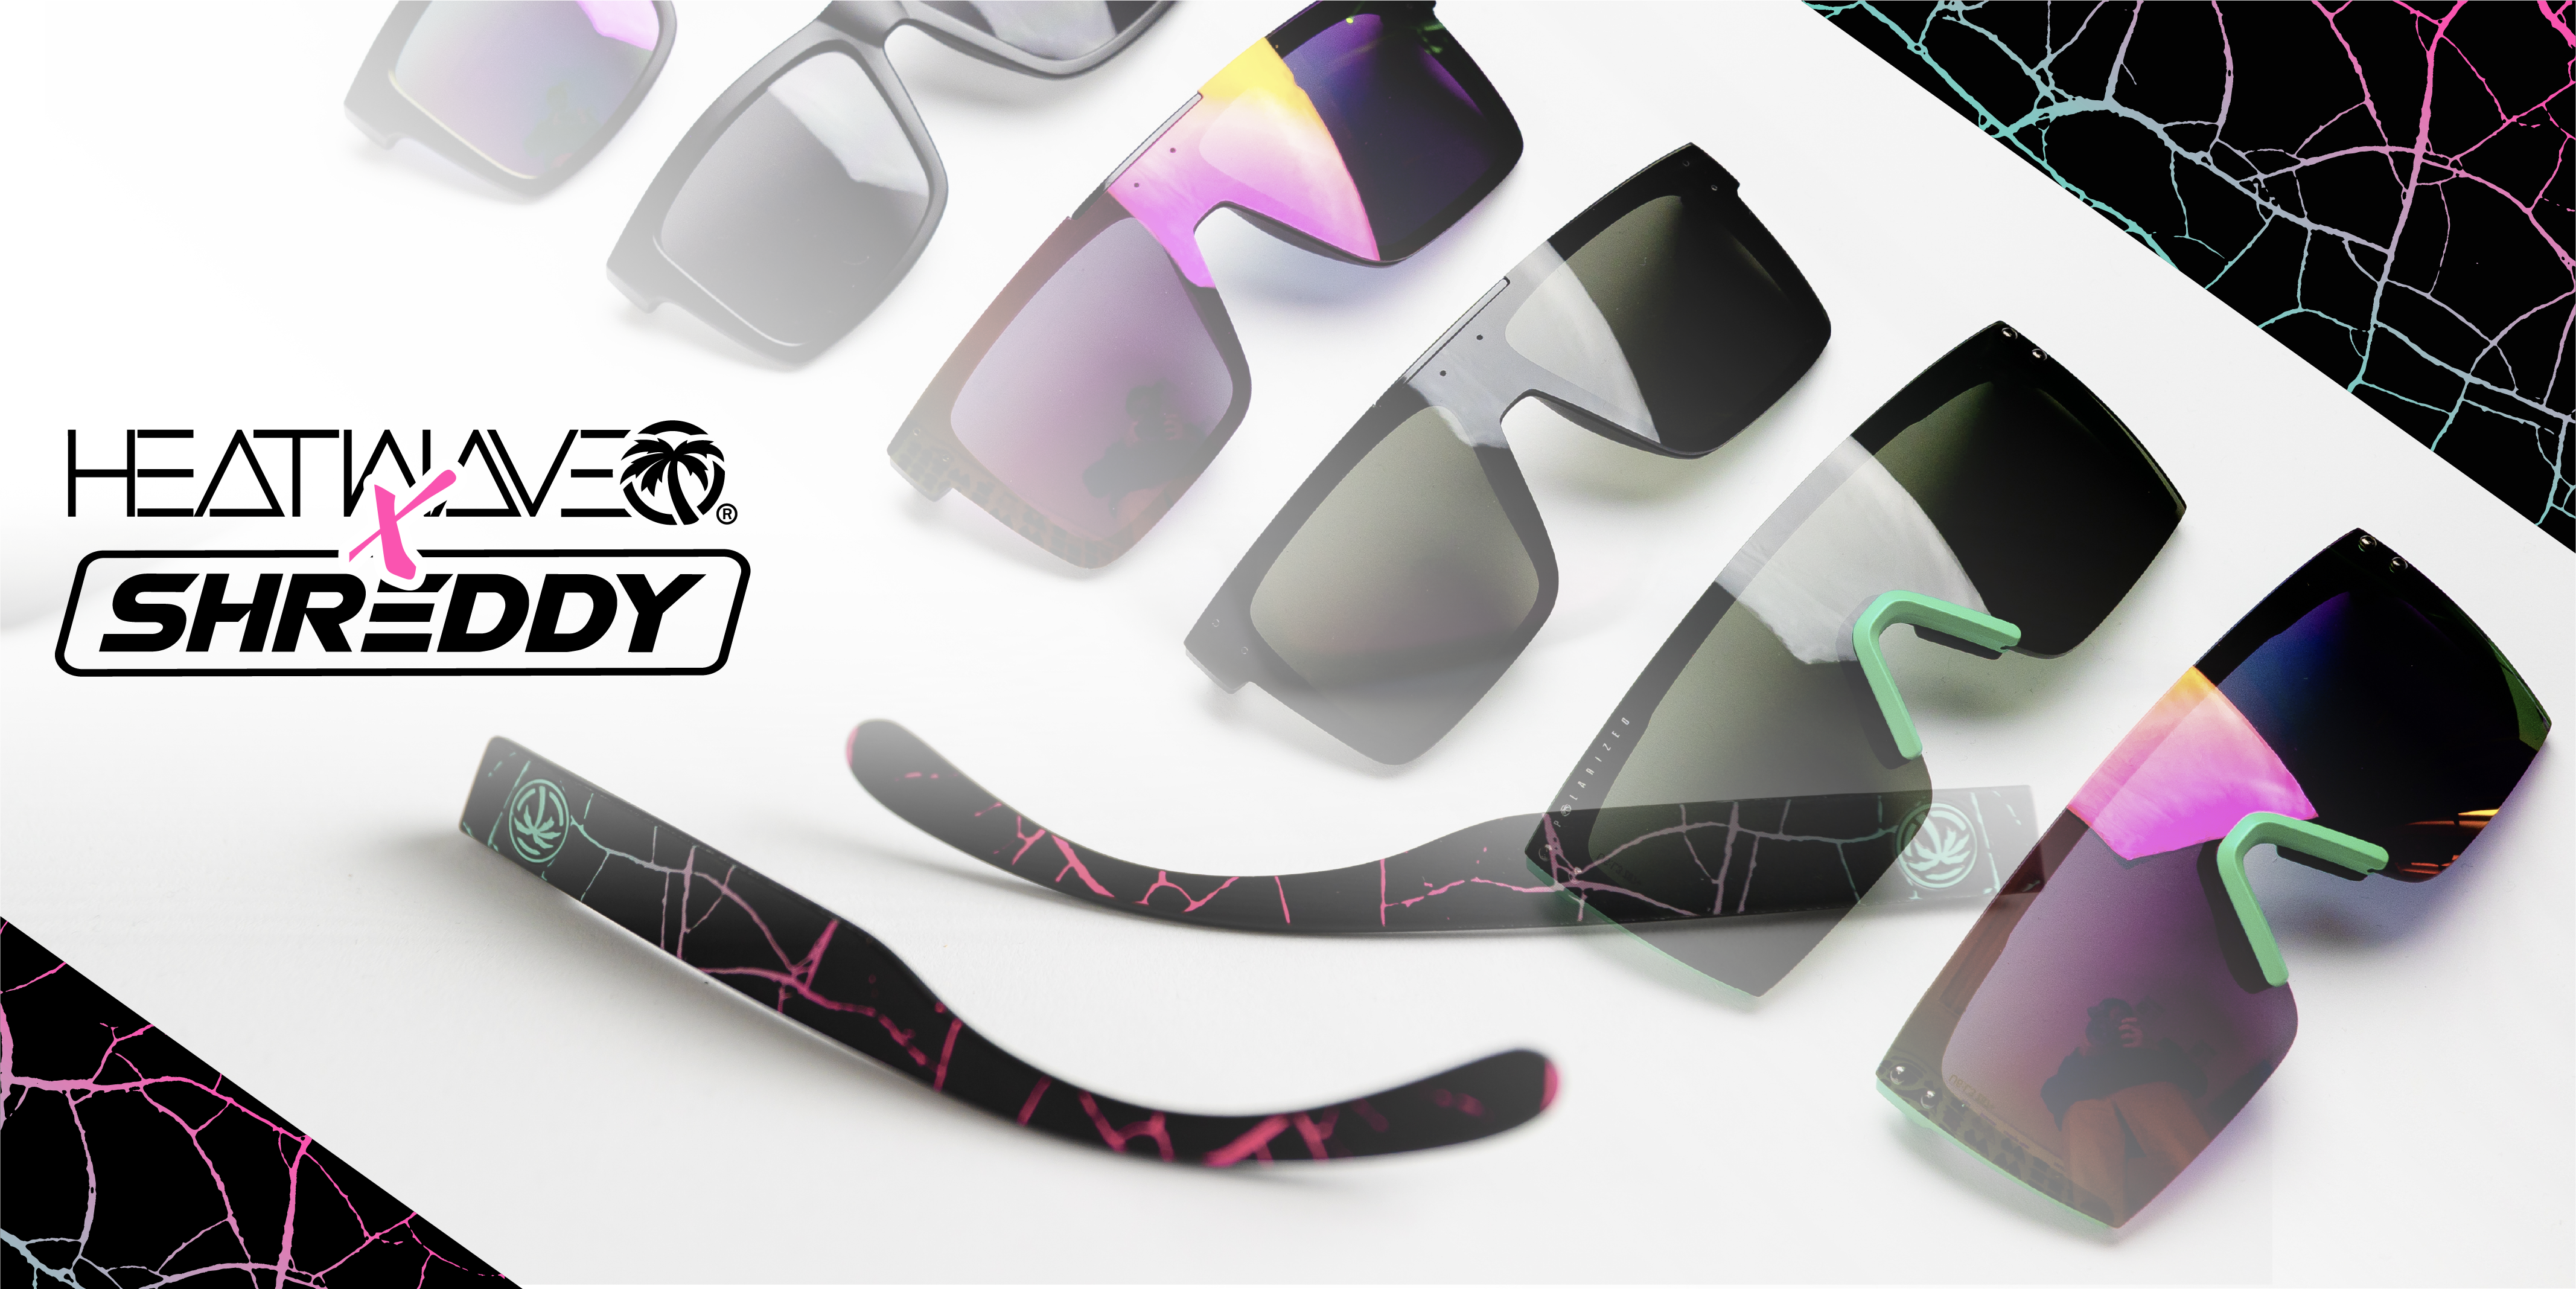 Heatwave X Shreddy - Sunglasses Exclusive Collection Banner